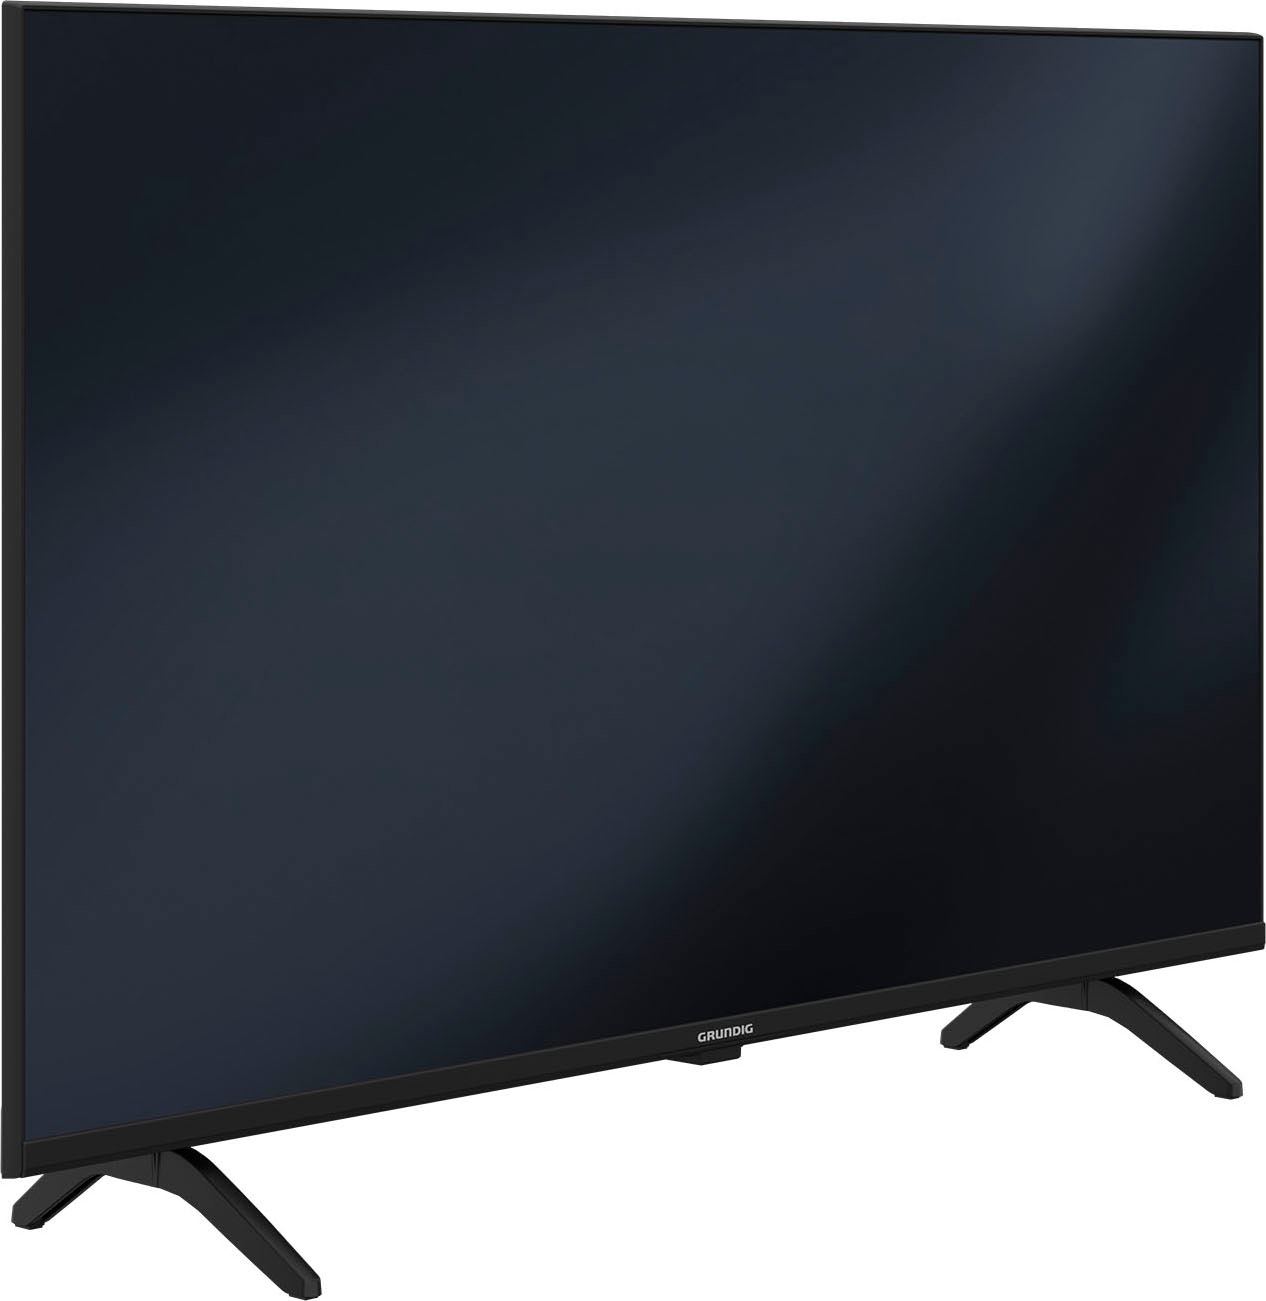 Grundig LED-Fernseher »32 VOE 631 BR2T00«, 80 cm/32 Zoll, HD ready, Android TV-Smart-TV